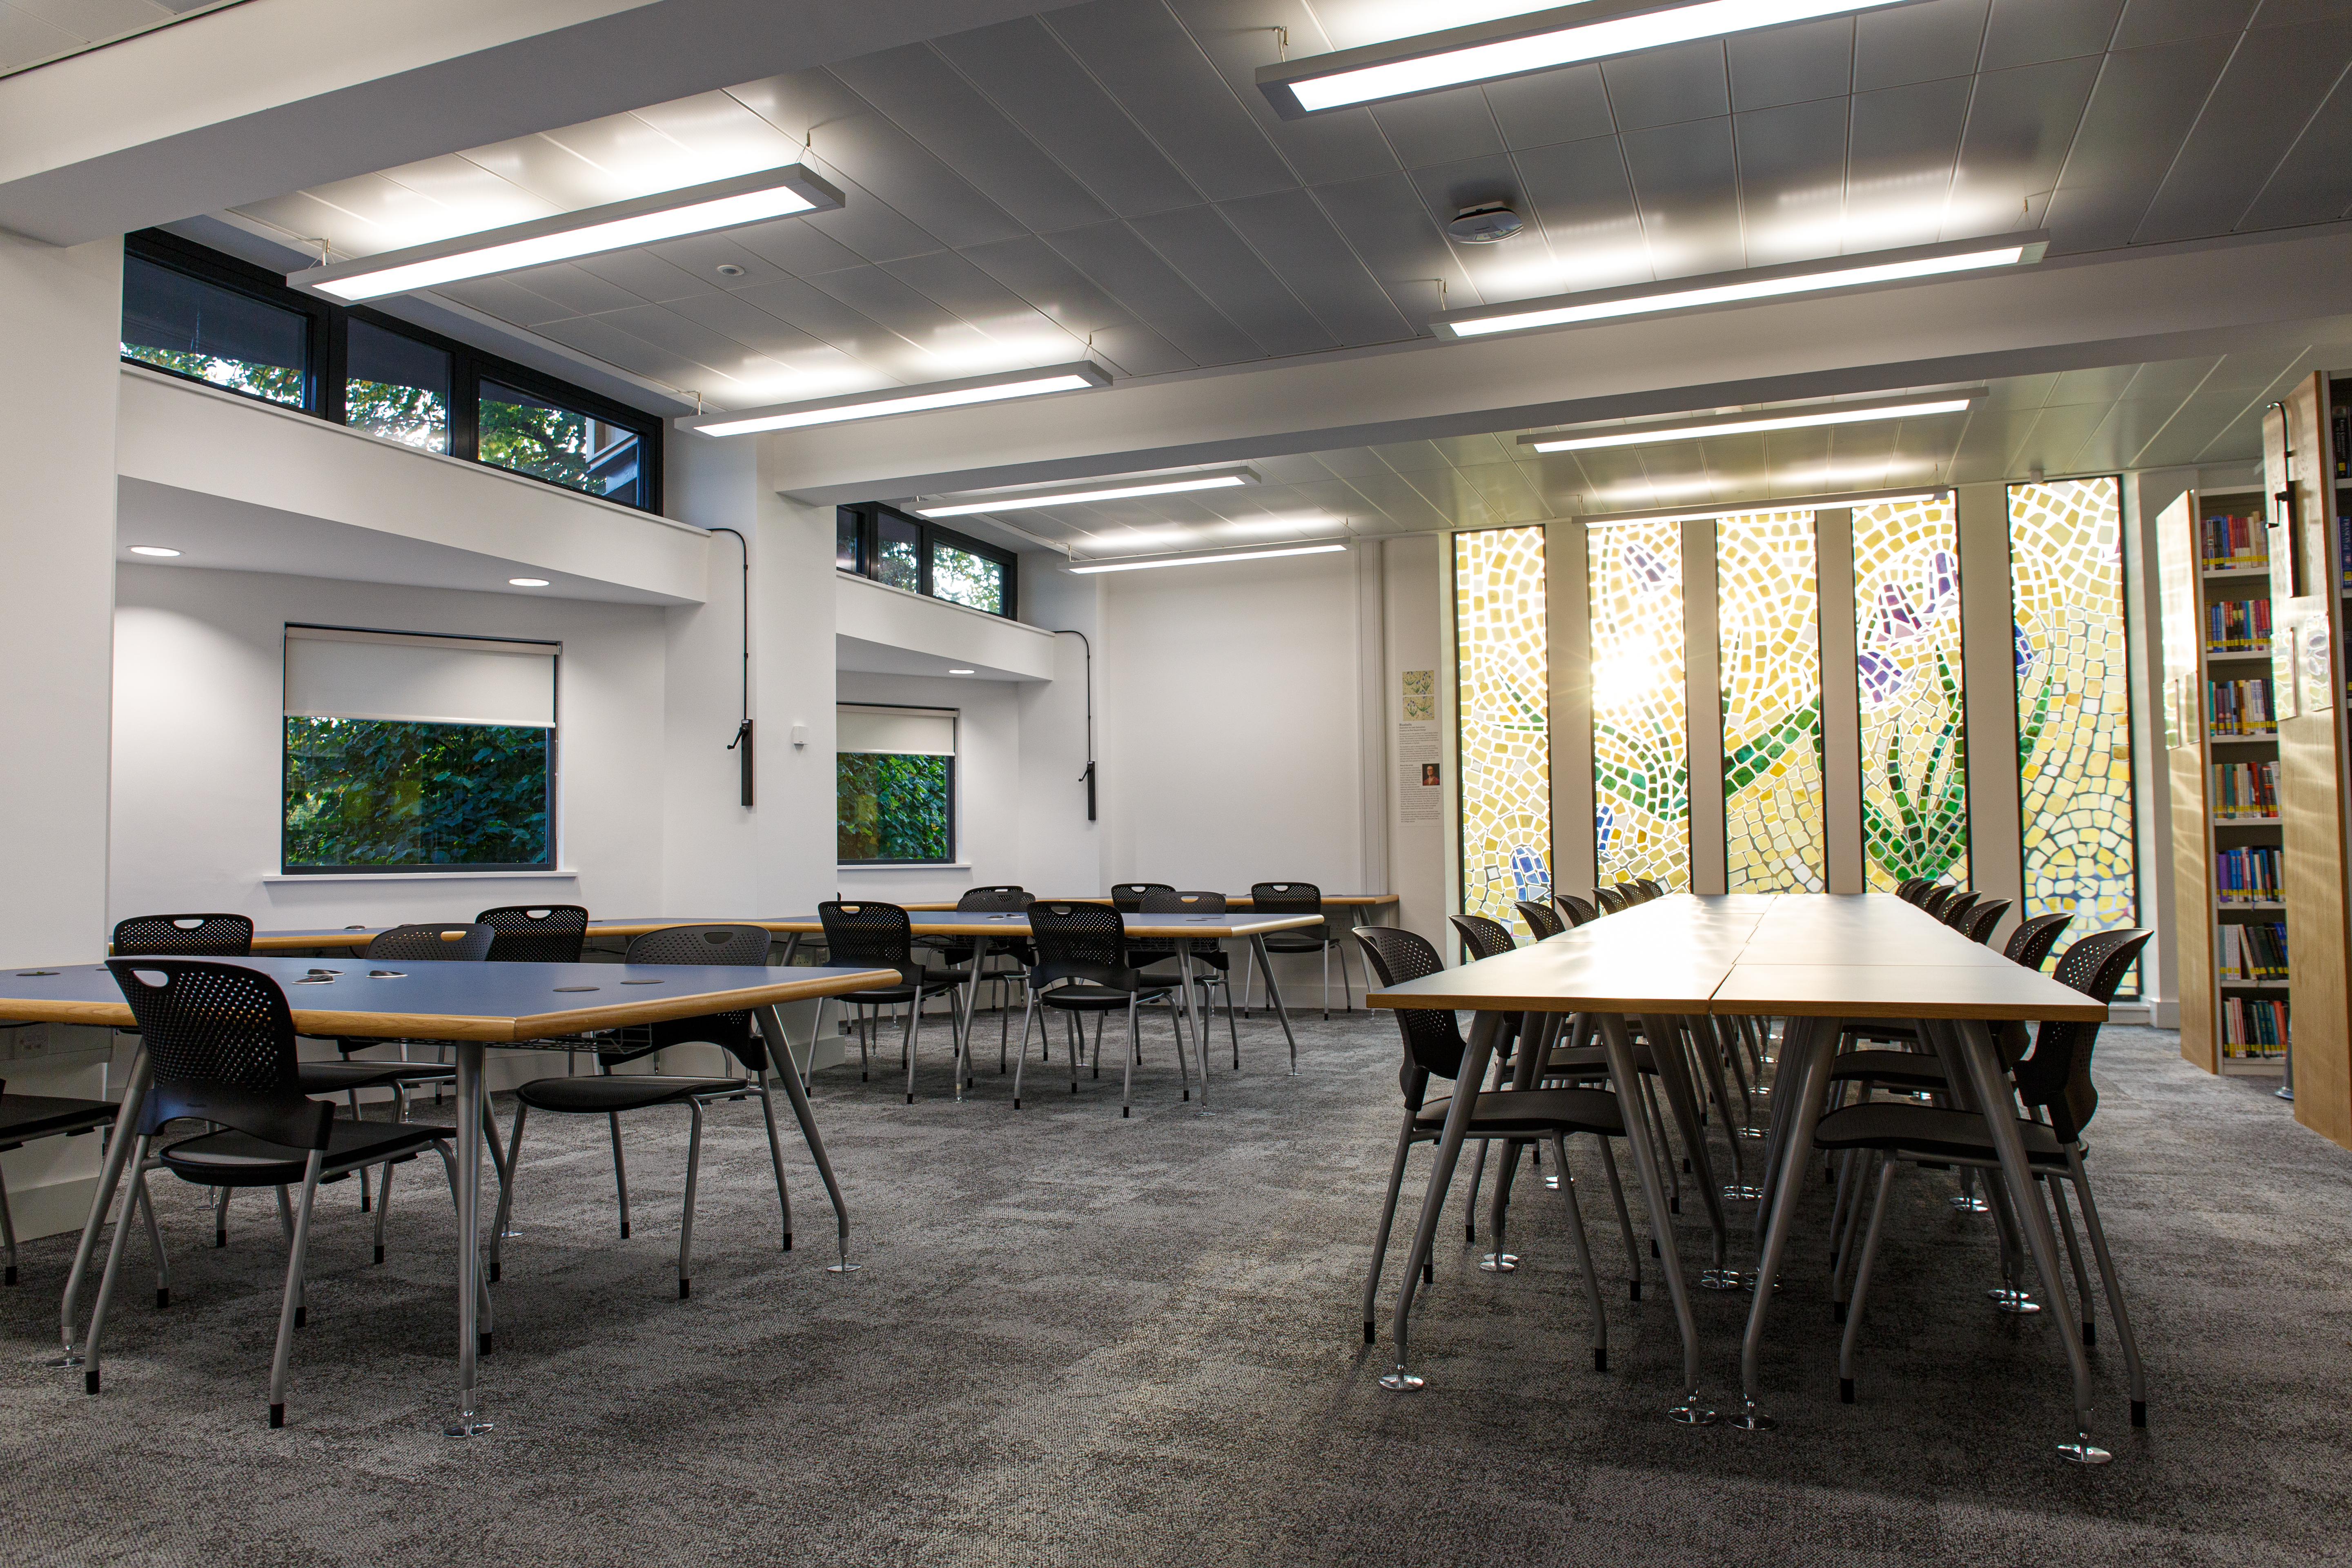 Study space for students with bookshelves, tables and chairs